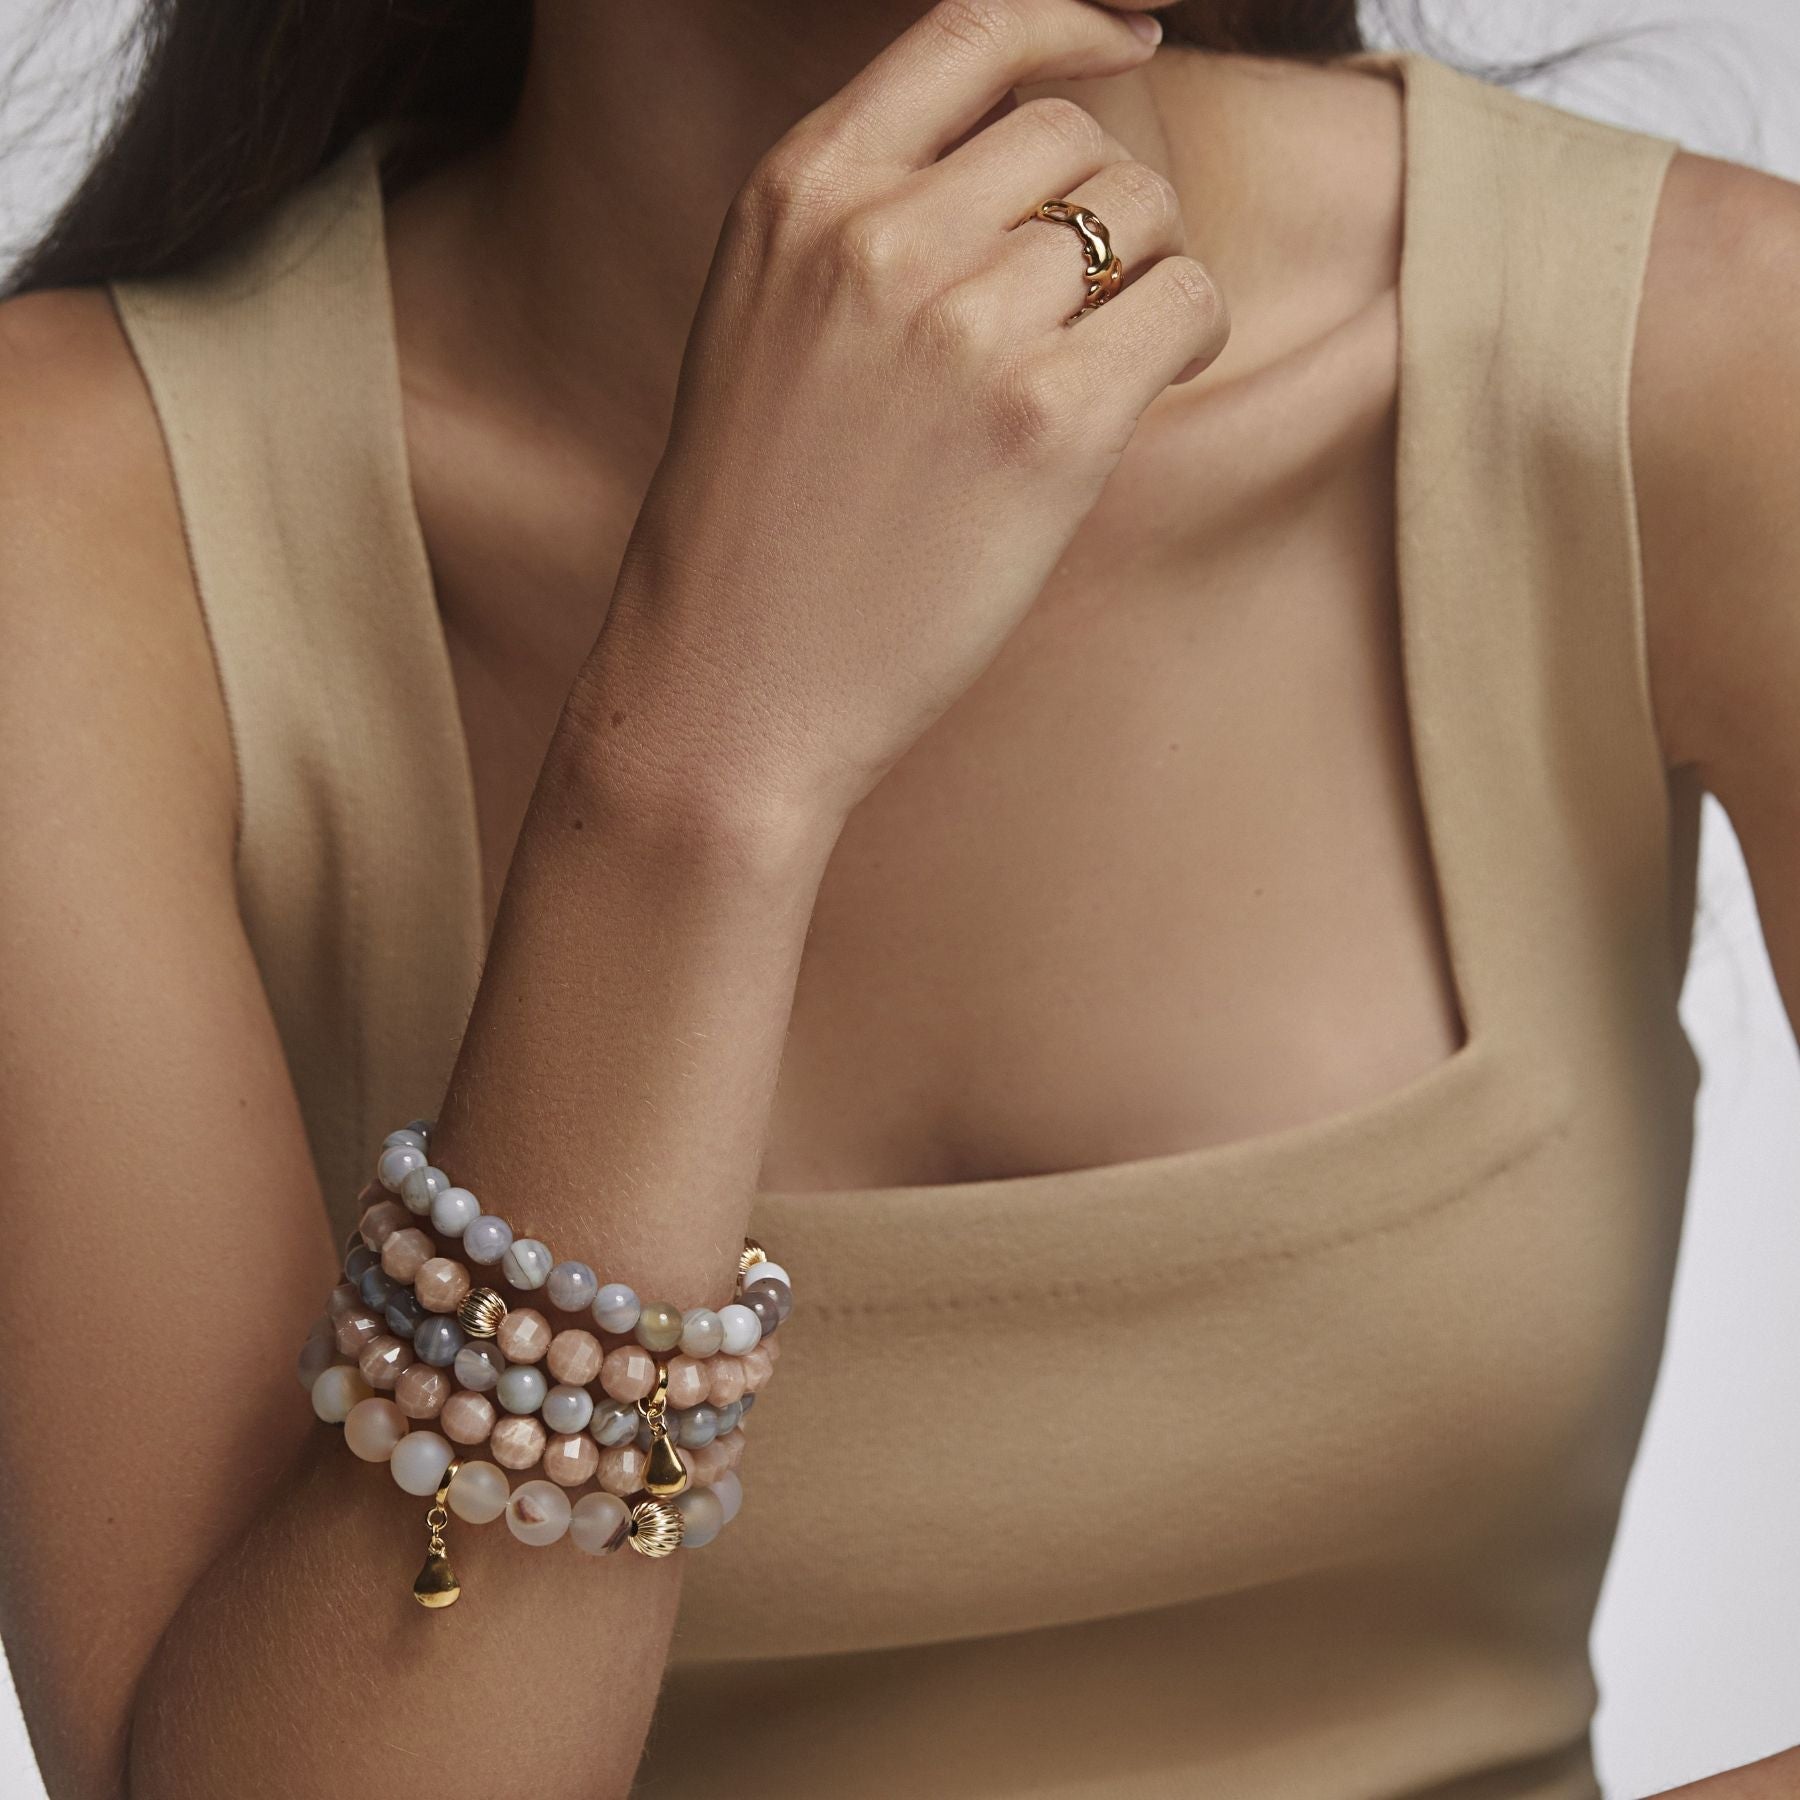 Crystal gemstone elastic bracelets with textured 14k gold-filled accent bead and 14k gold vermeil Anjou pear charm.